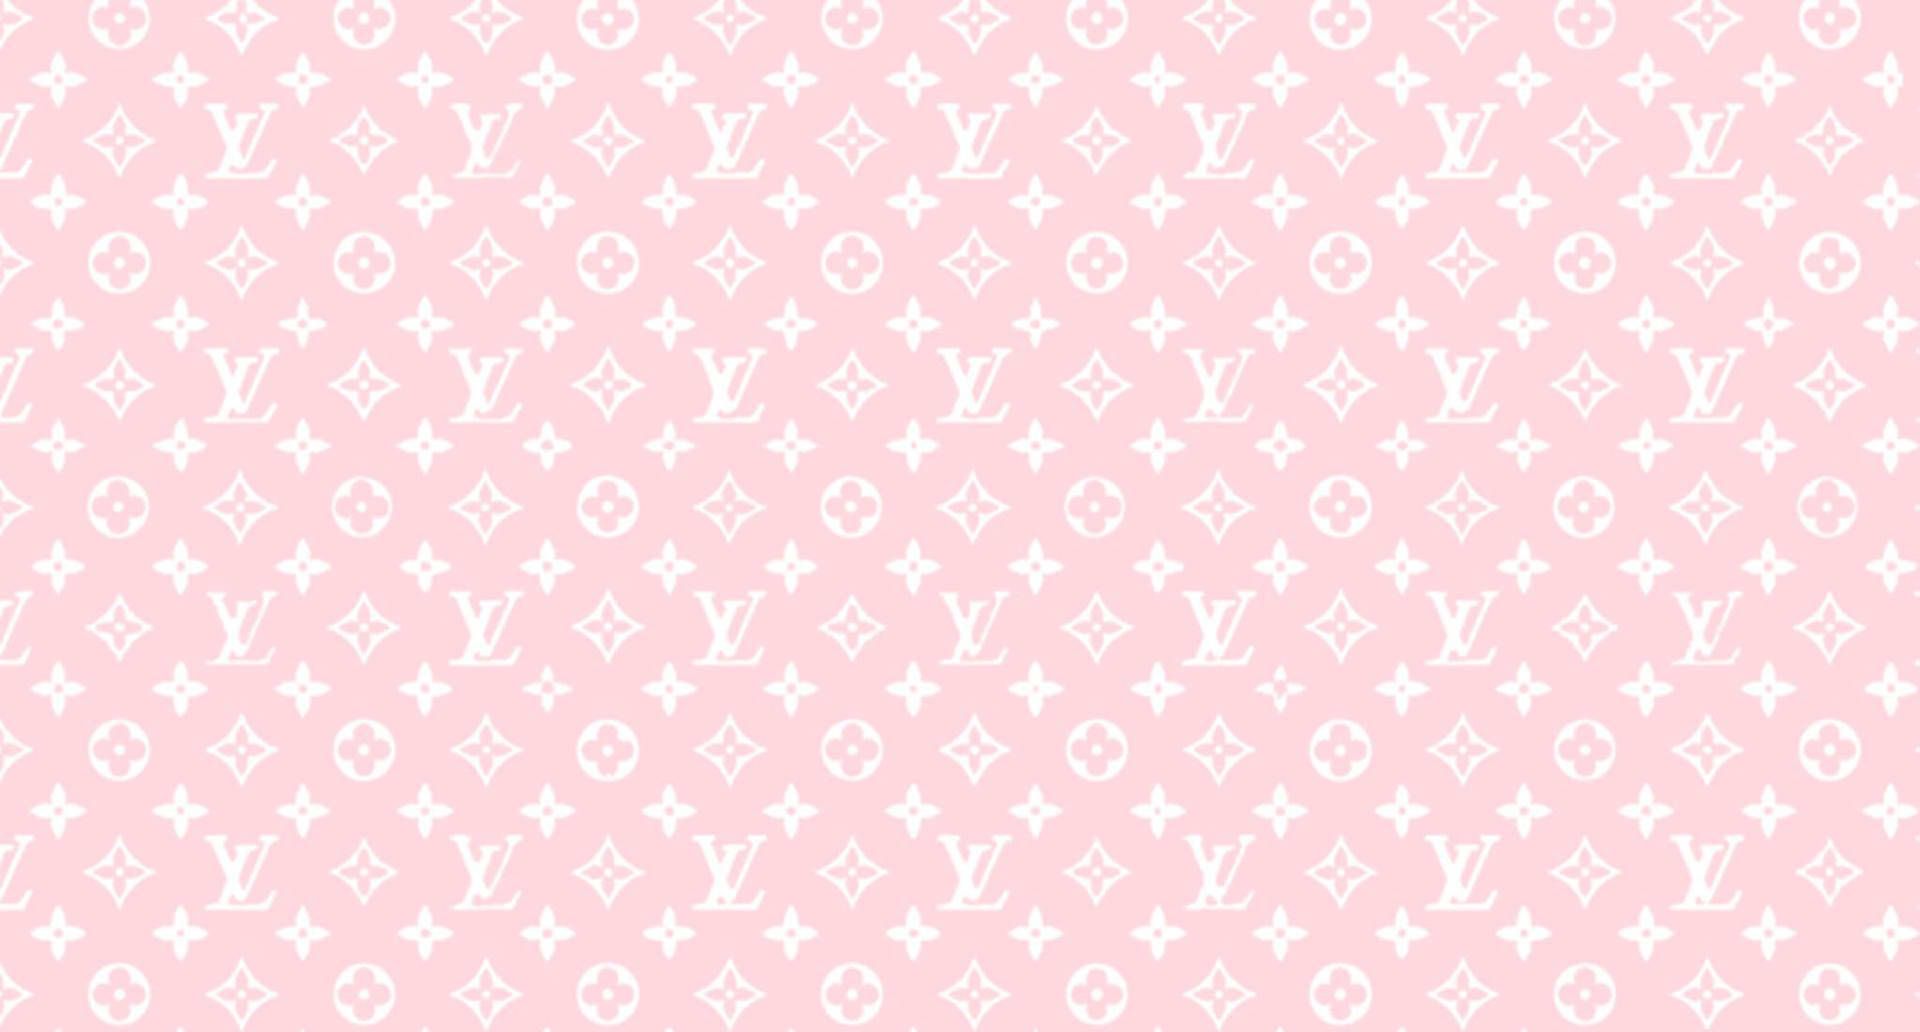 A pink and white pattern with the louis vuitton logo - Louis Vuitton